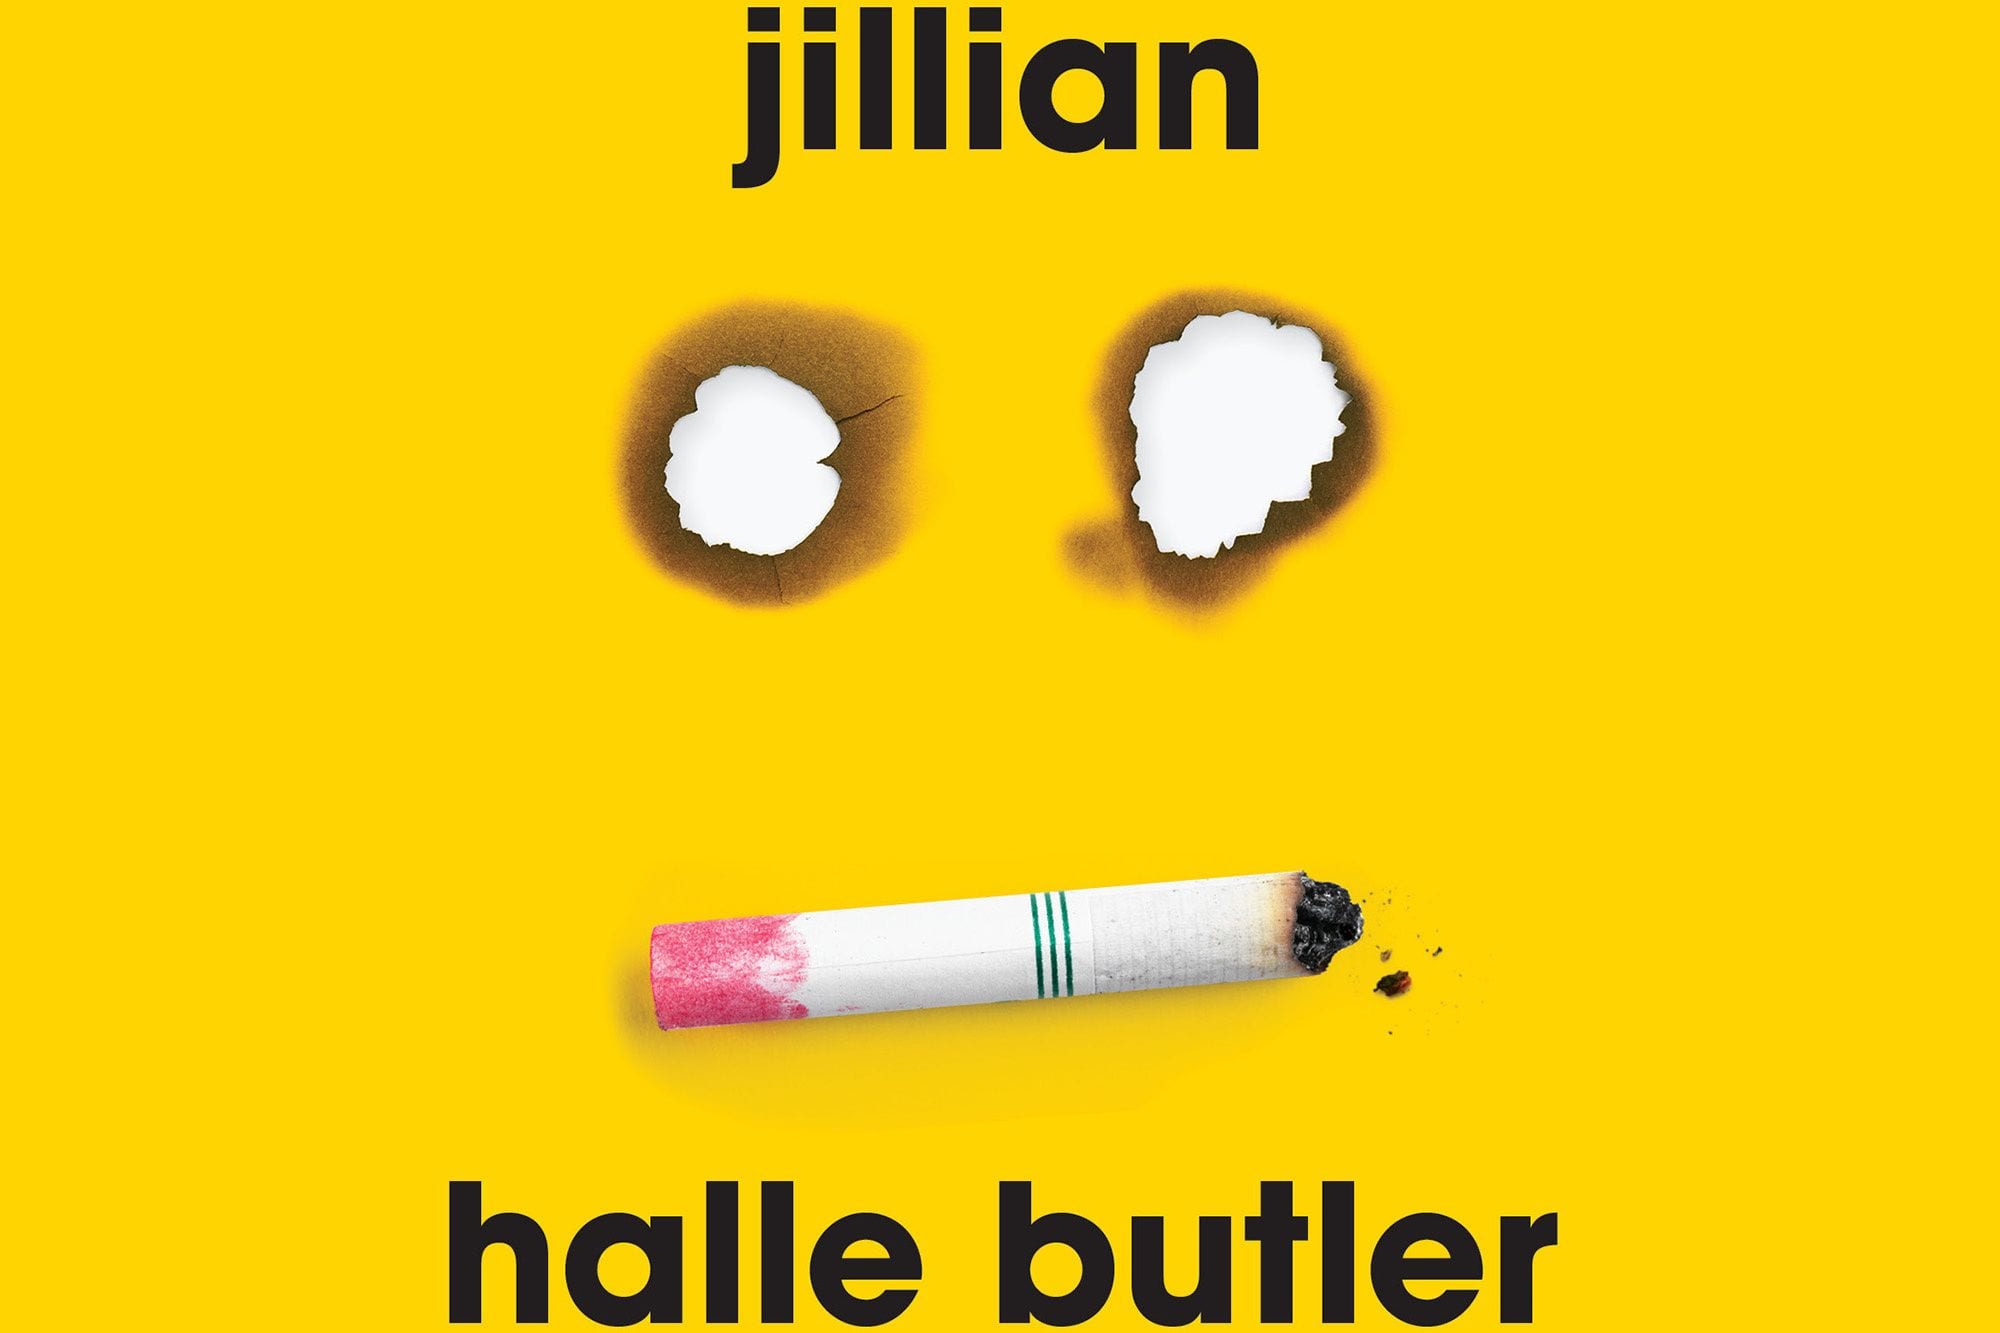 Halle Butler’s ‘Jillian’ Is a Frank Account of Discontent